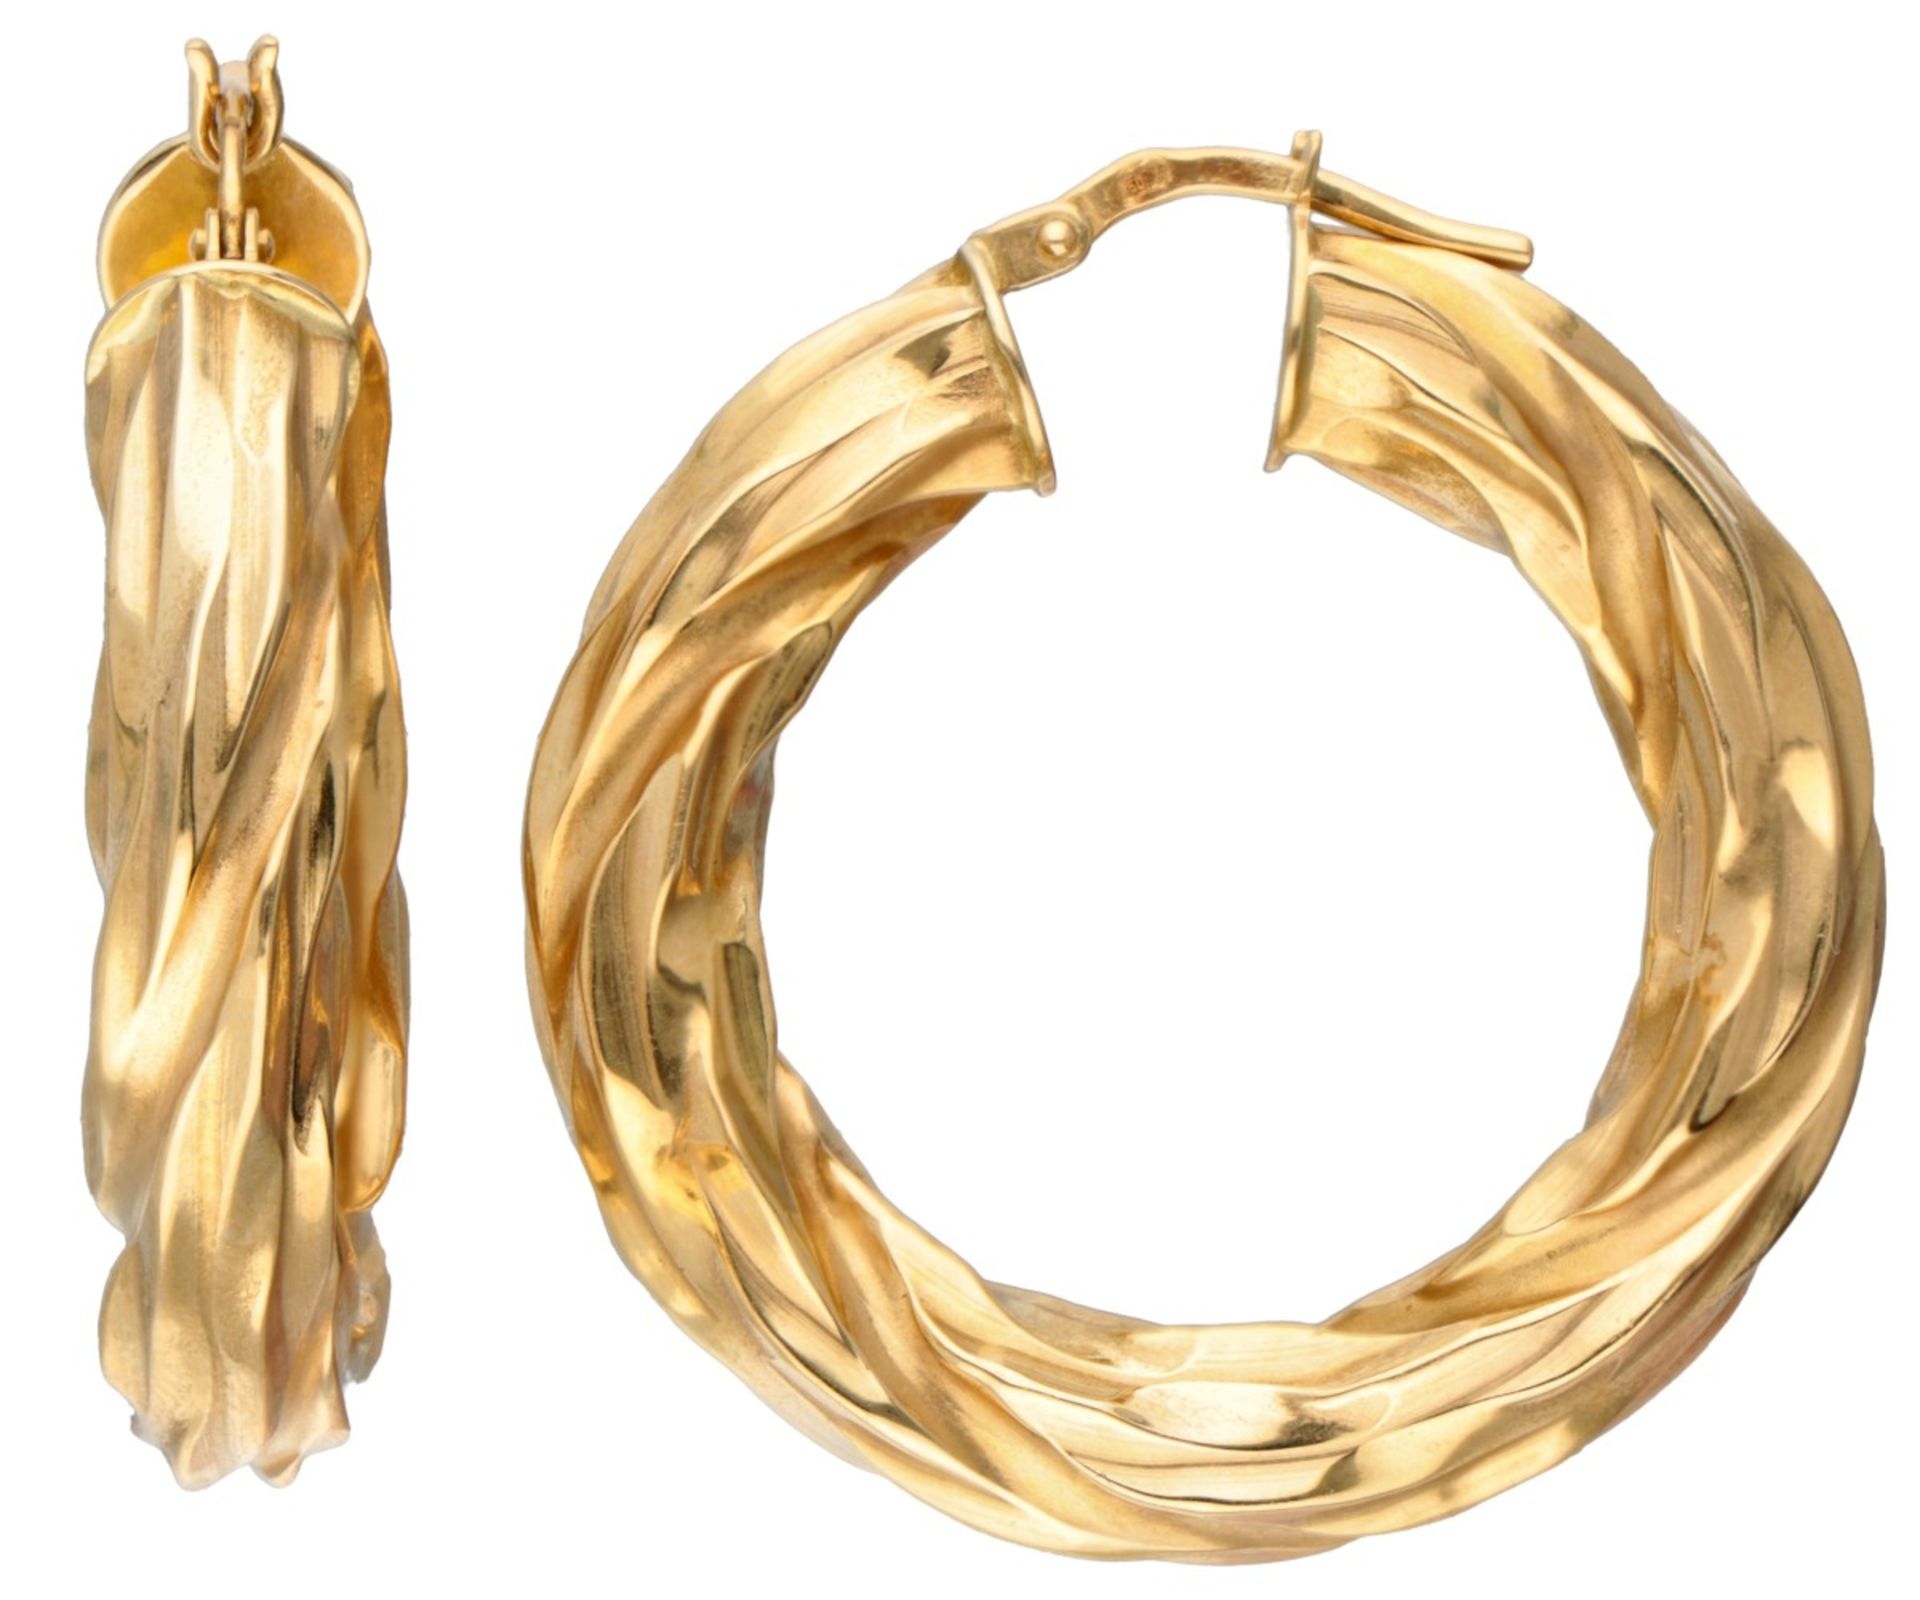 18K. Yellow gold creole earrings with twisted design. - Image 2 of 2